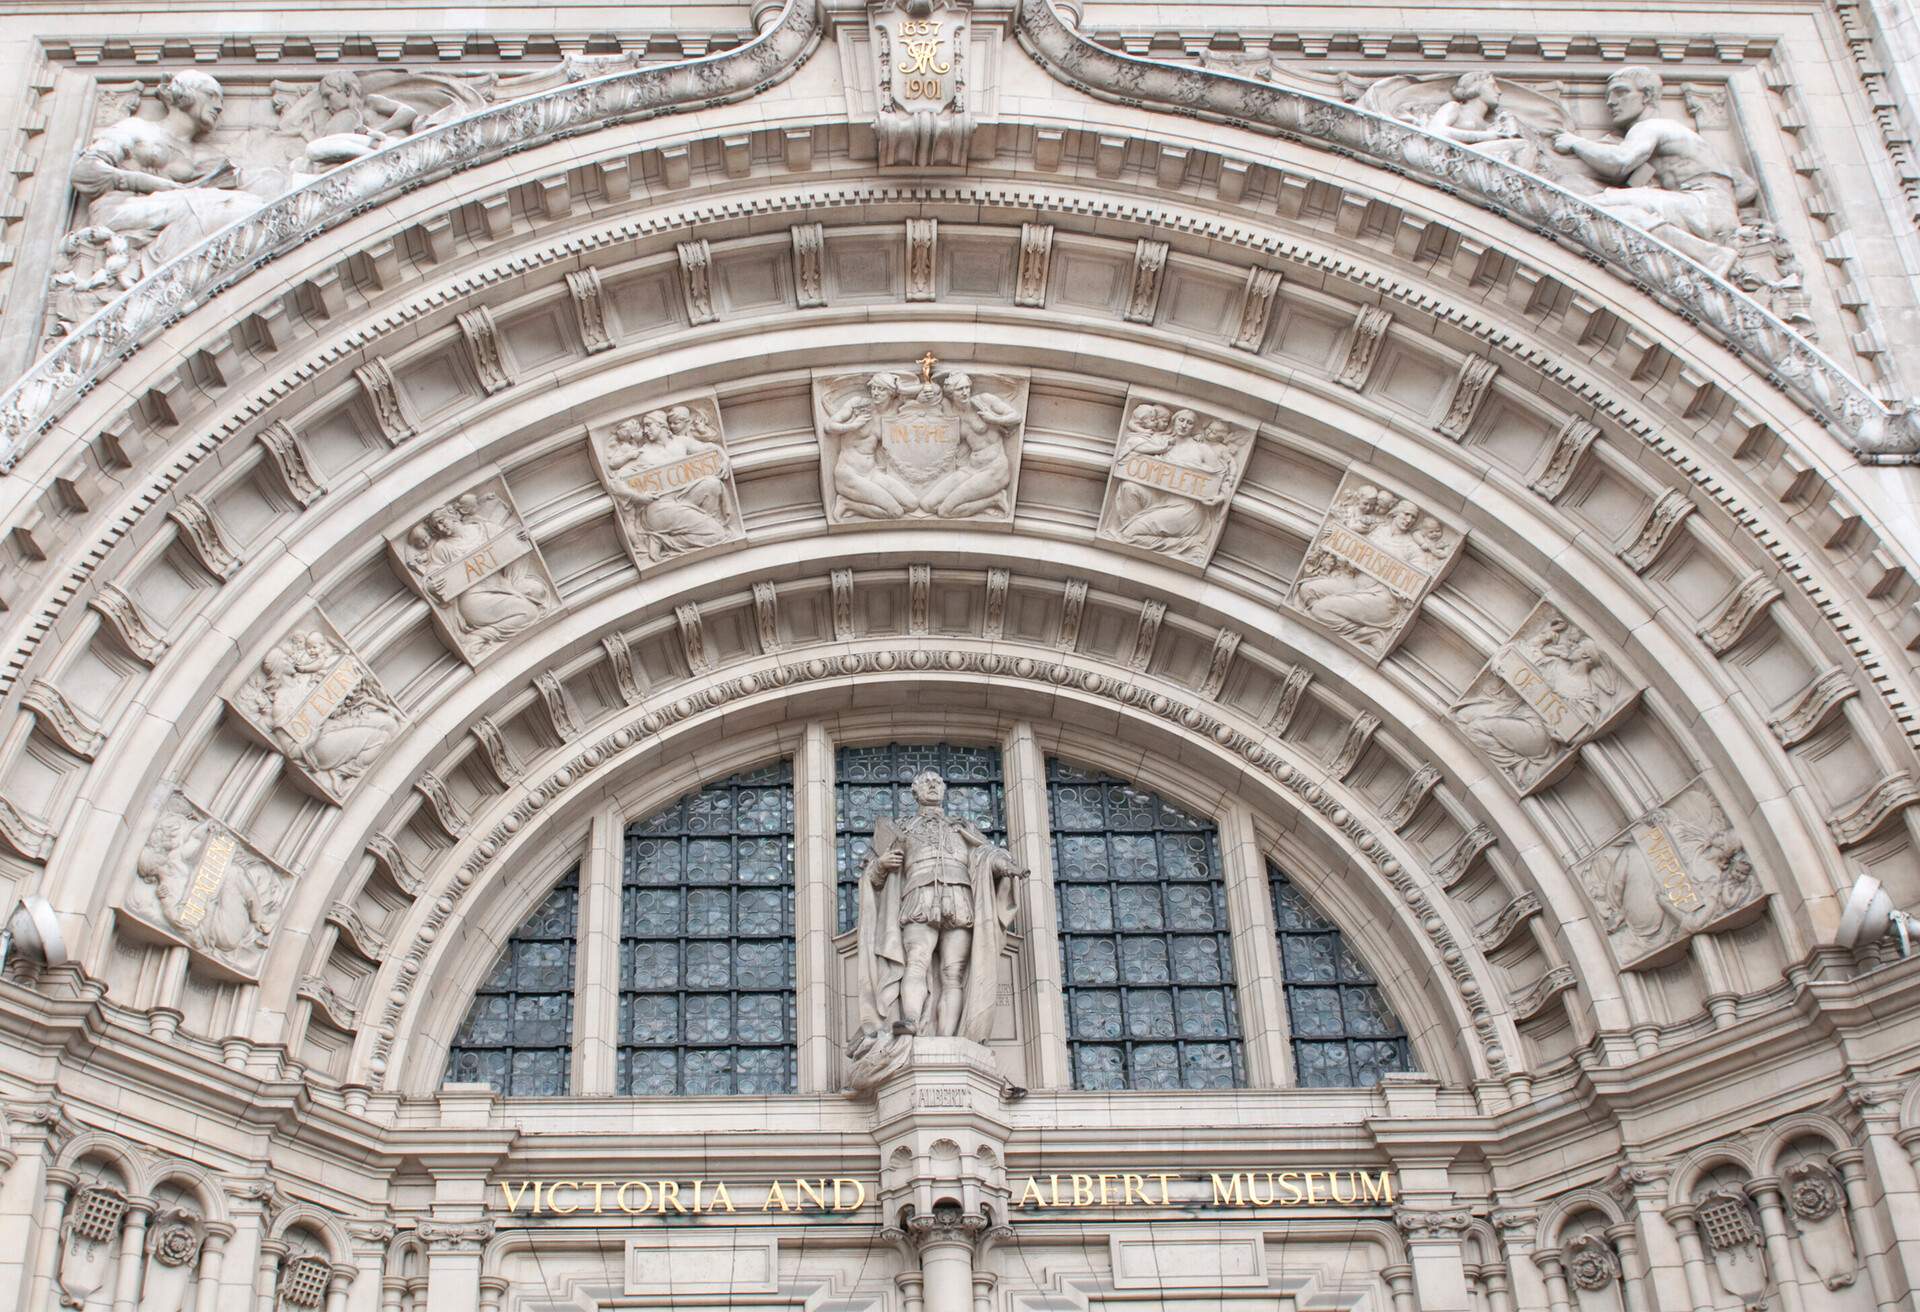 Eentrance to the Victoria and Albert Museum in London. More London: